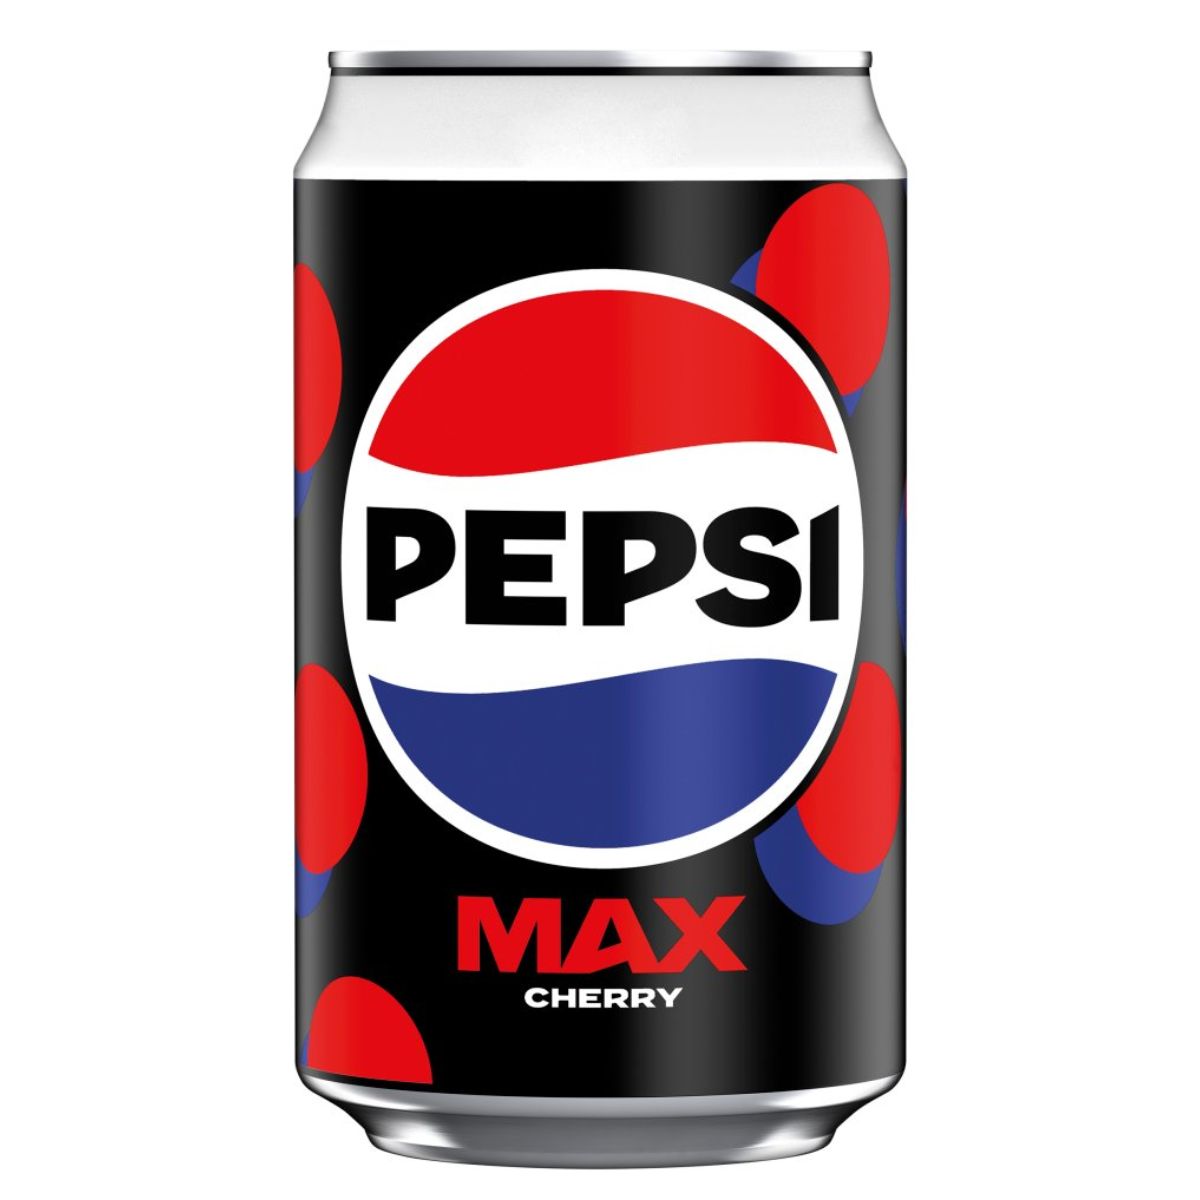 A Pepsi - Max Cherry Can - 330ml on a white background.